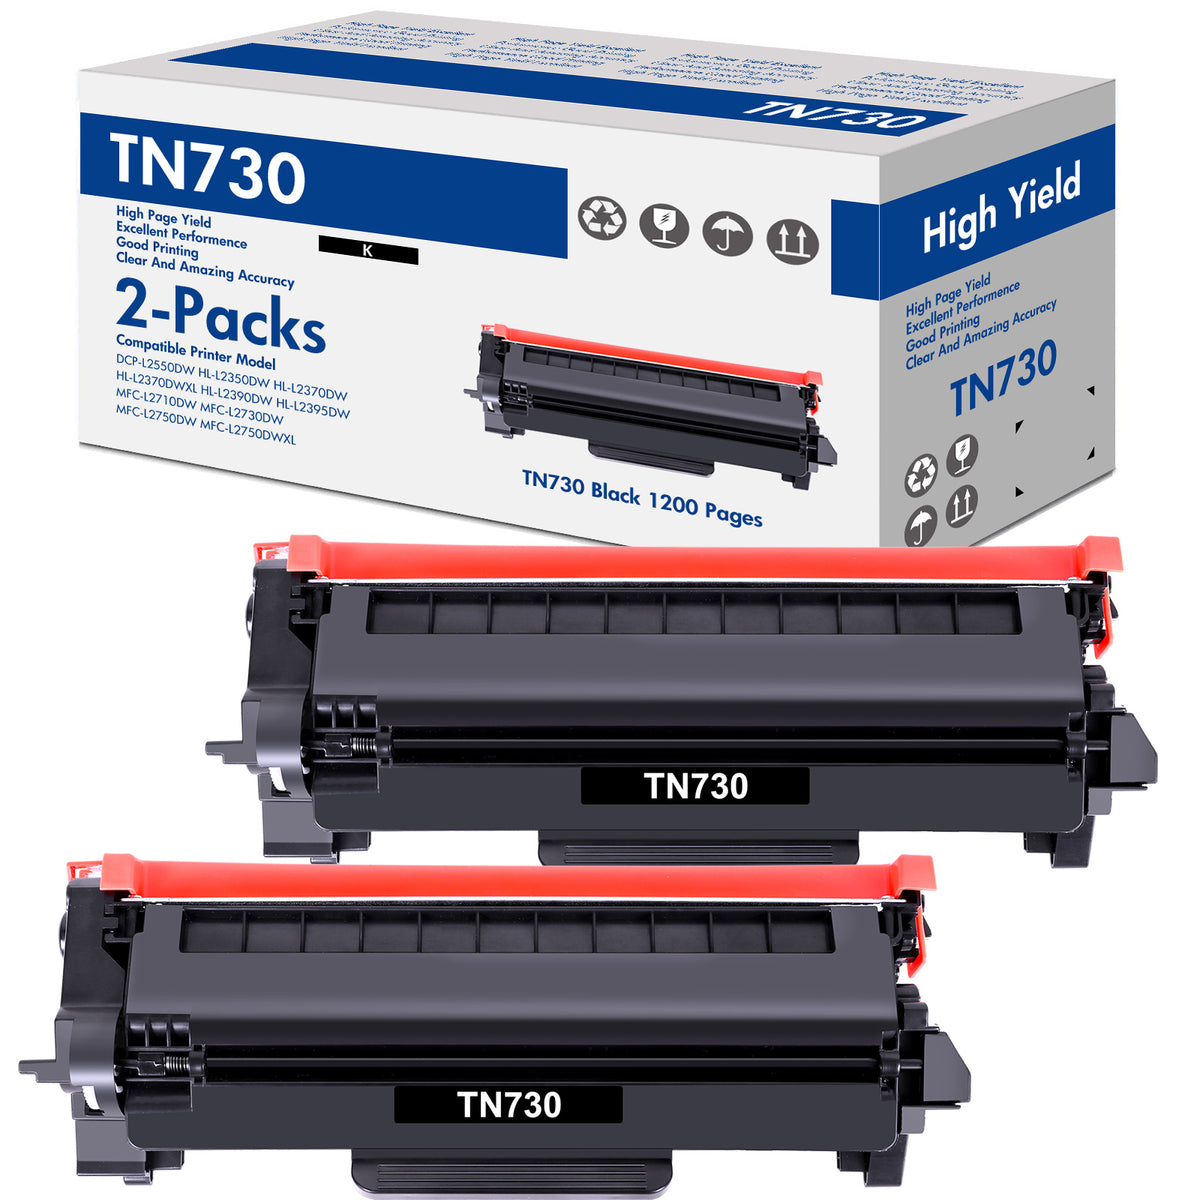  TN760/TN730 tn760 tn730 Compatible Toner Cartridge Replacement  for Brother (Black,2 Pack) for use with MFC-L2710DW MFC-L2750DW HL-L2350DW  HL-L2370DW HL-L2395DW HL-L2390DW DCP-L2550DW Printers : Office Products